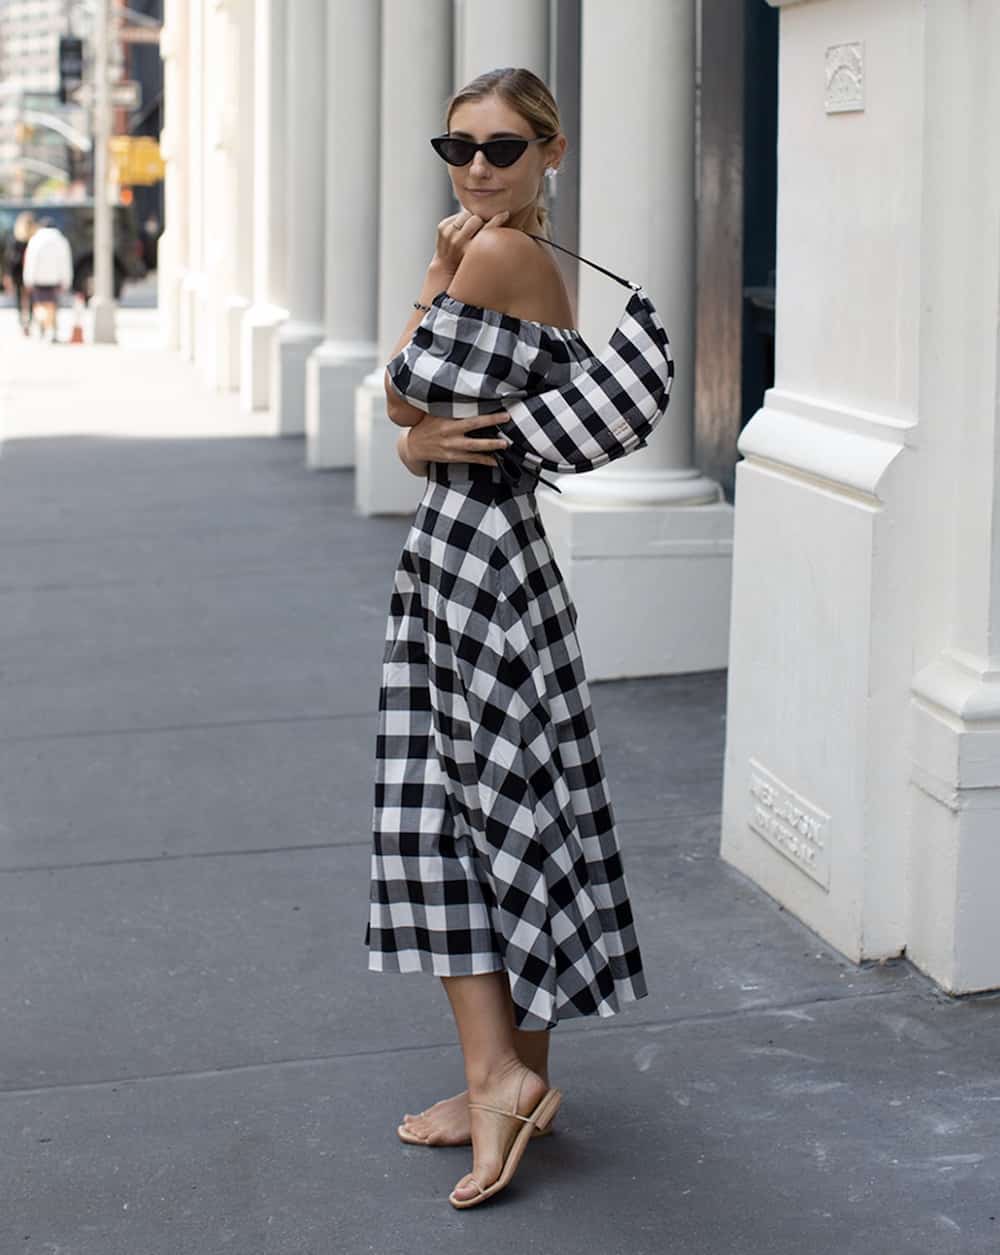 woman wearing a black and white gingham checkered dress and matching bag